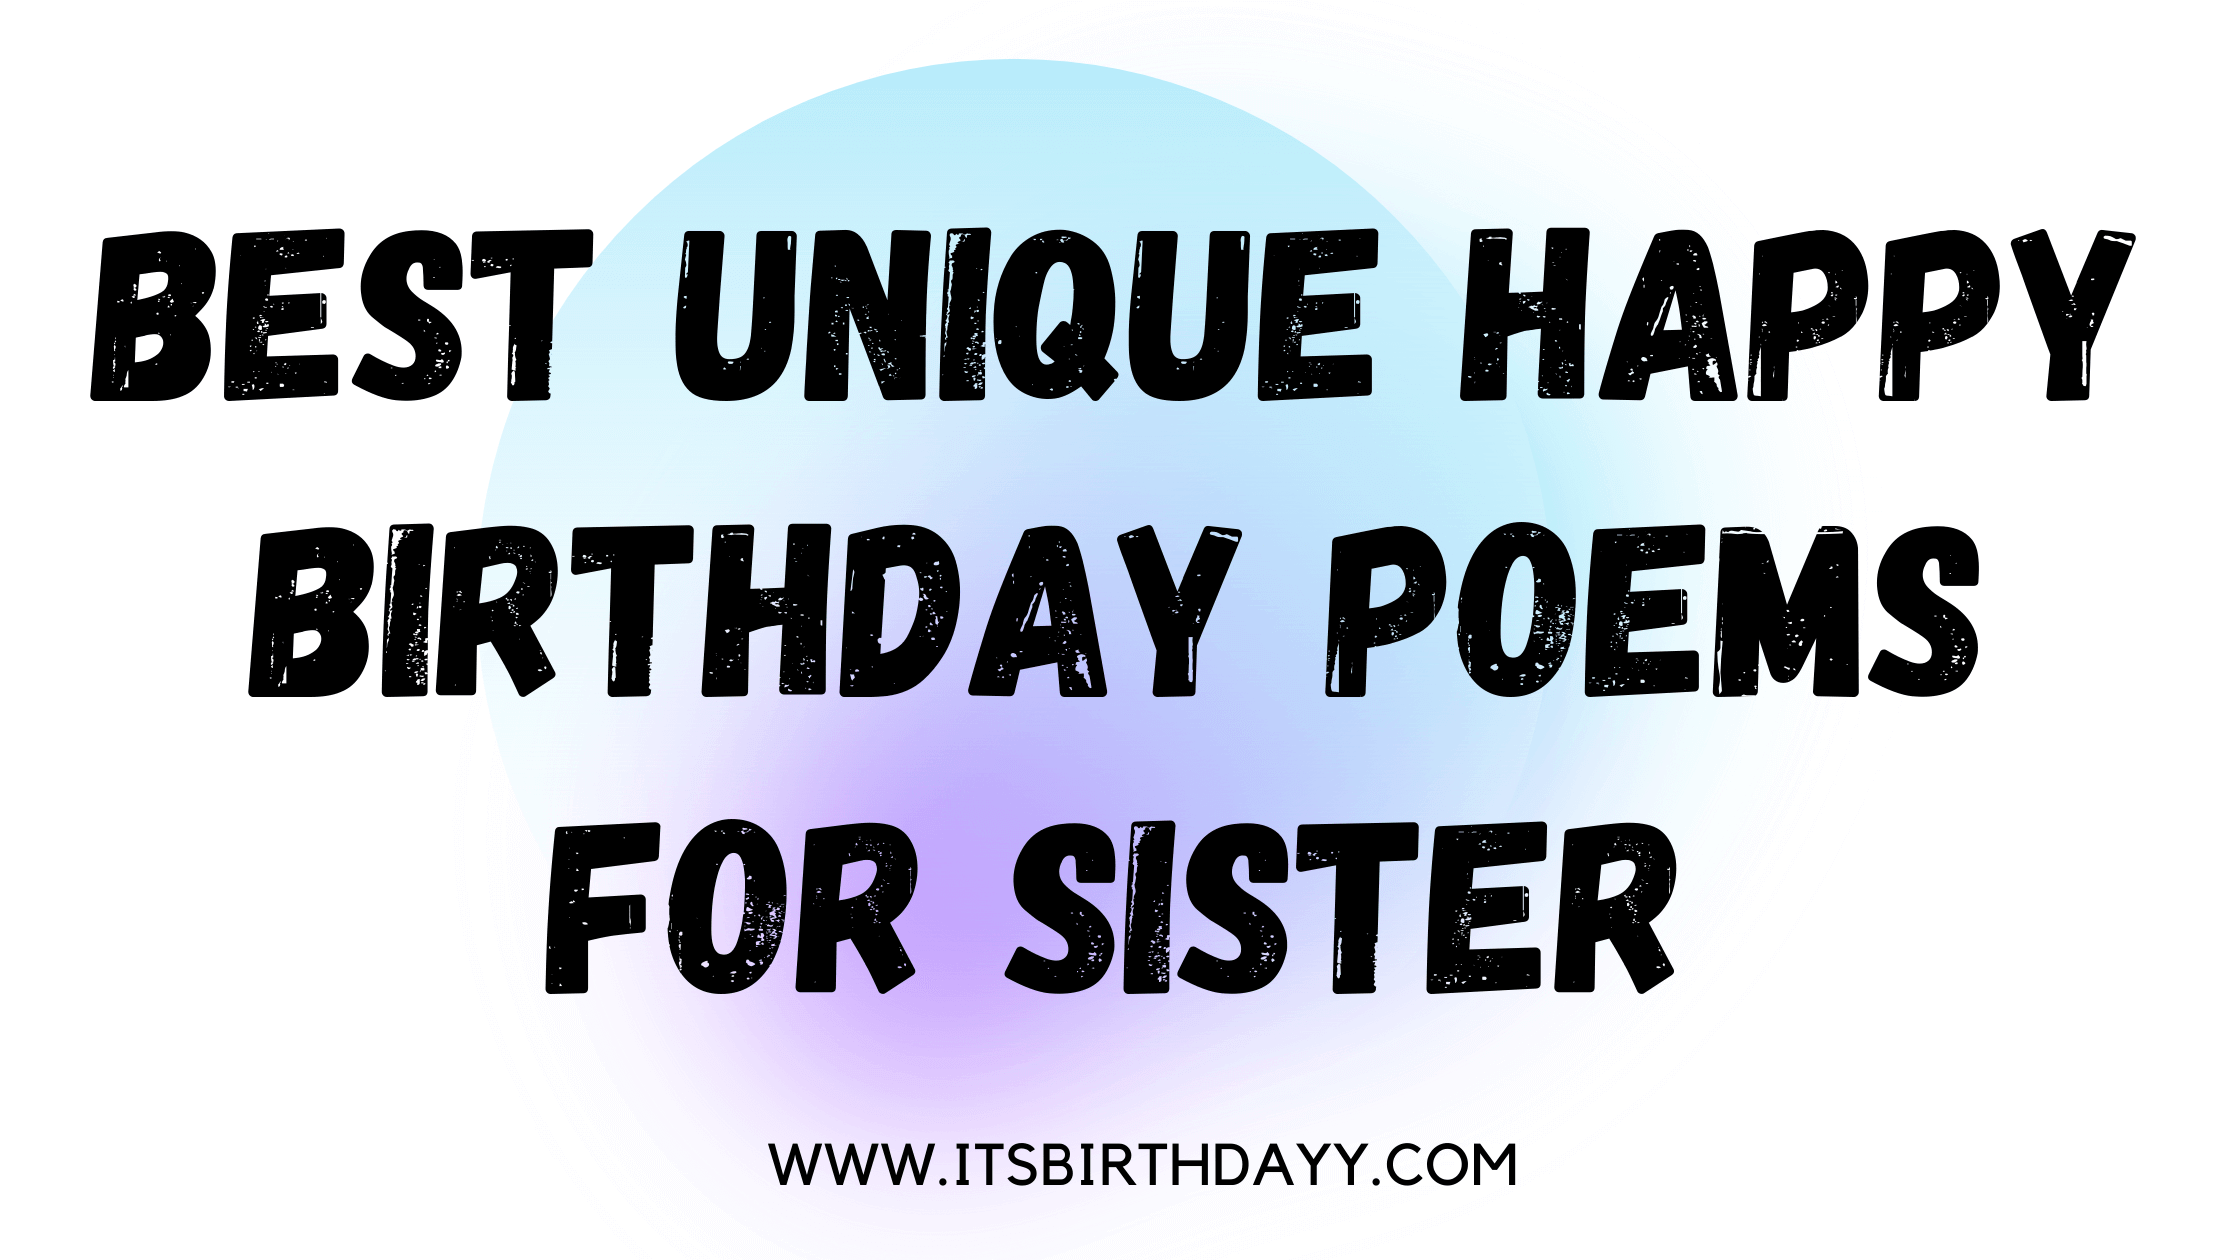 Best unique happy birthday poems for sister